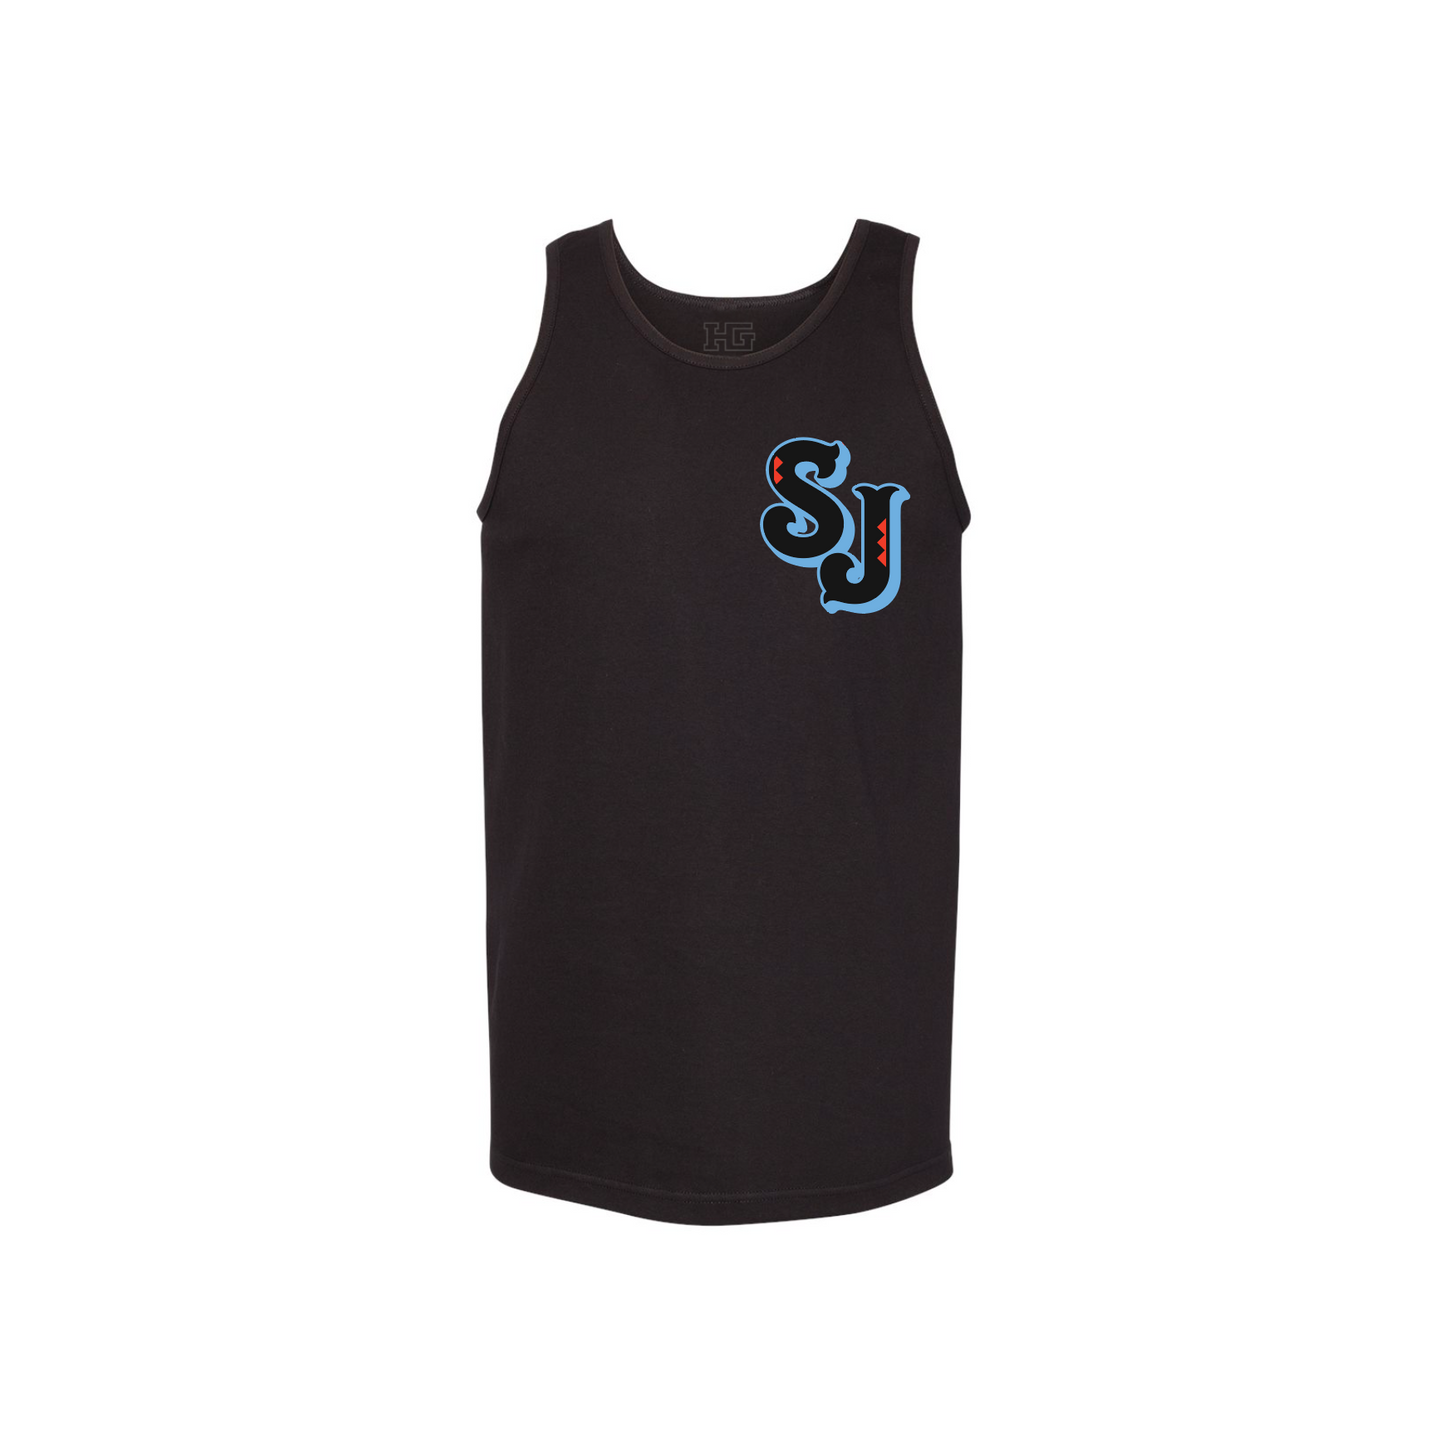 SJ Hometown Tank Top “Blue/Red/Black” - Available in 2 colors